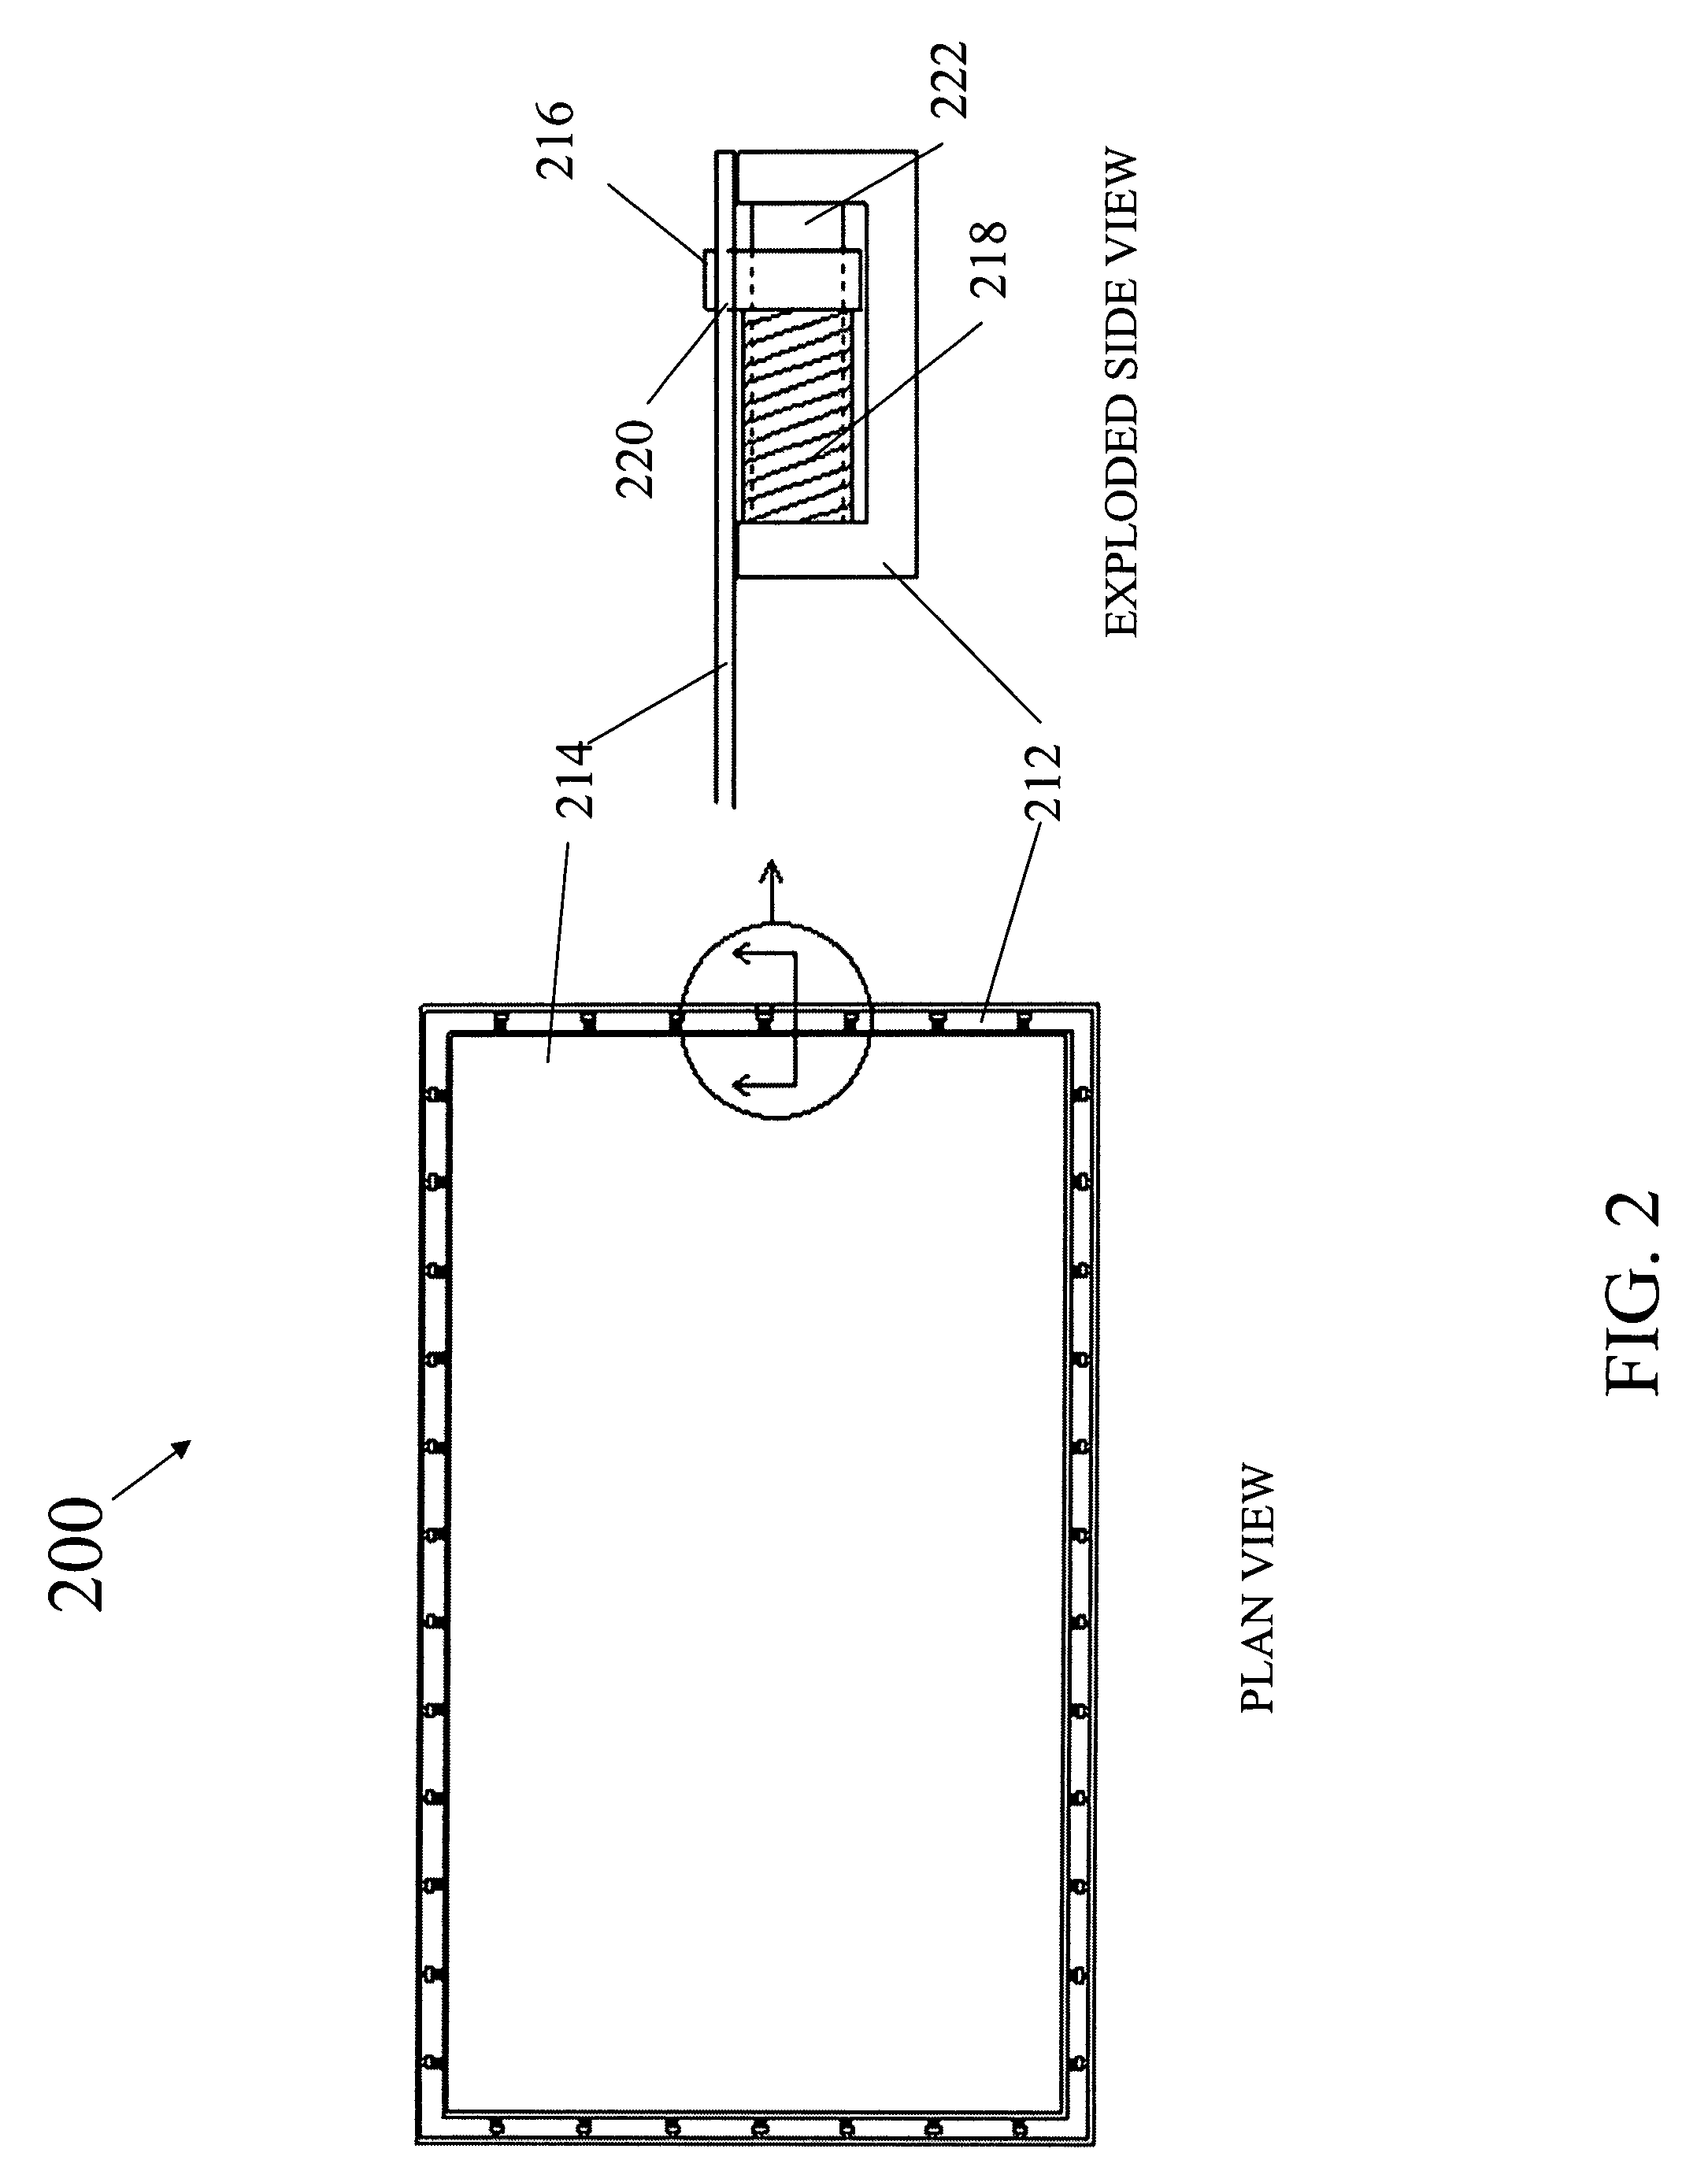 Optical element comprising restrained asymmetrical diffuser